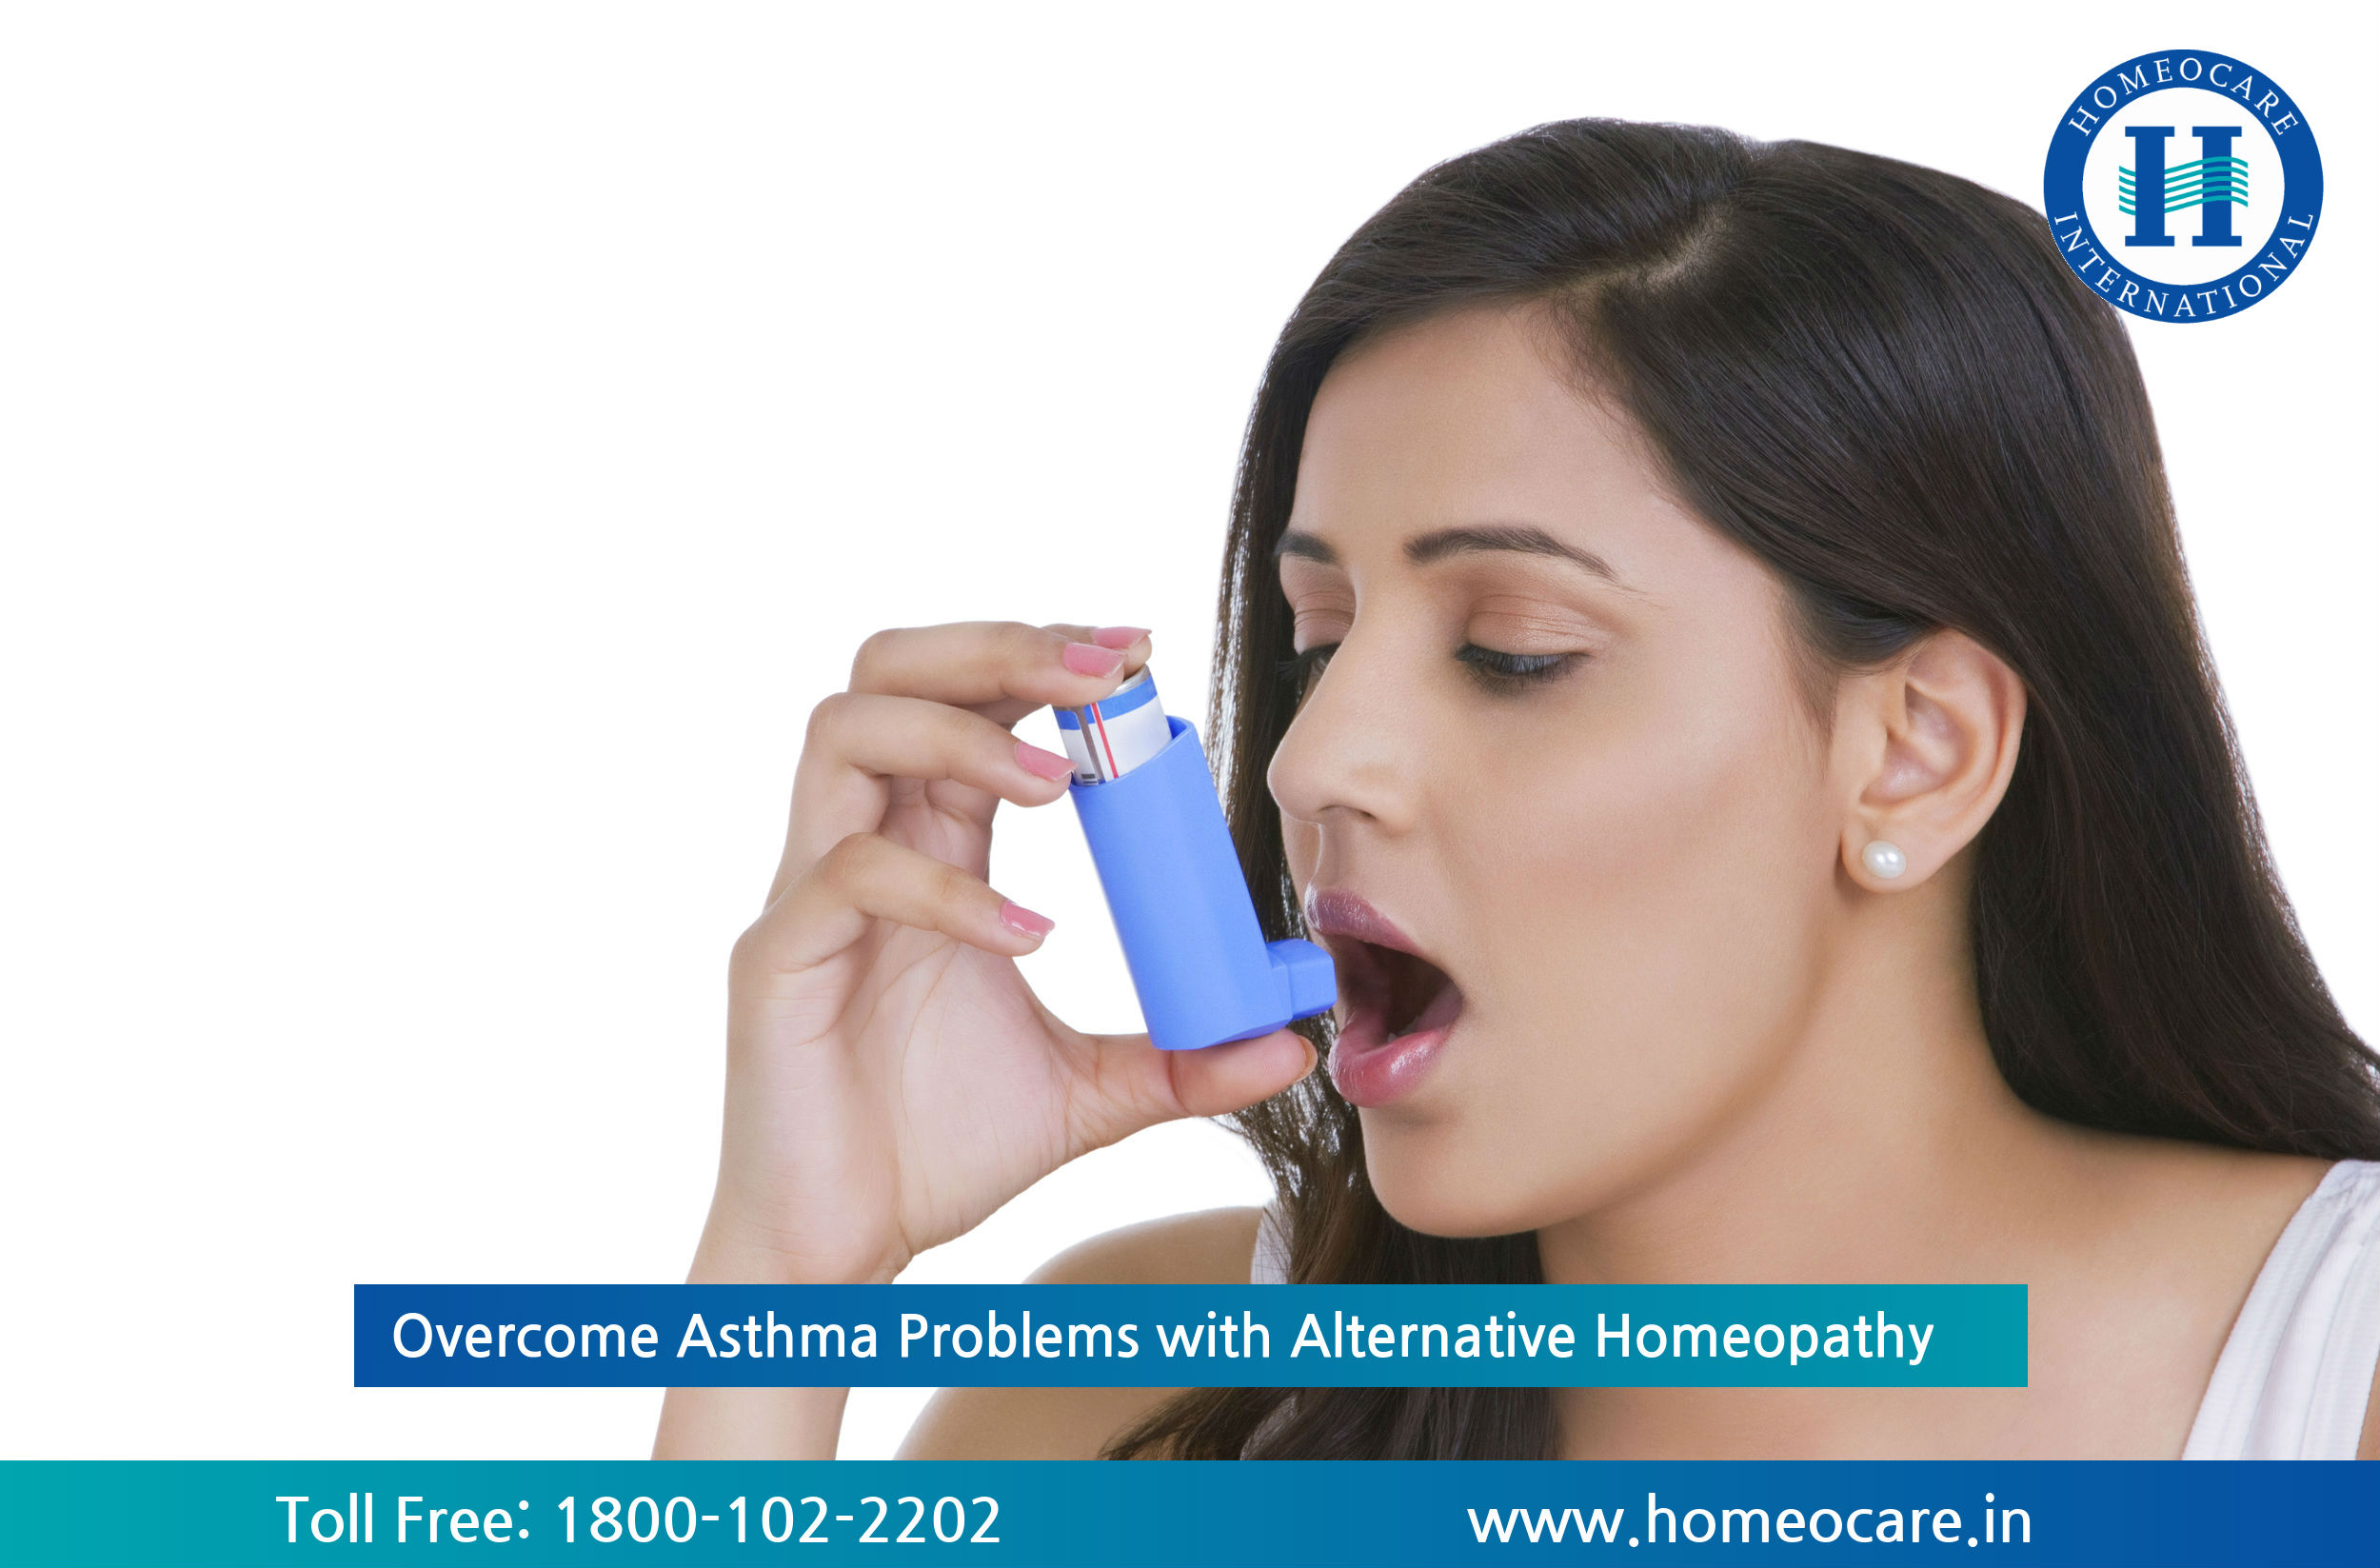 Overcome Asthma Problems with Alternative Homeopathy